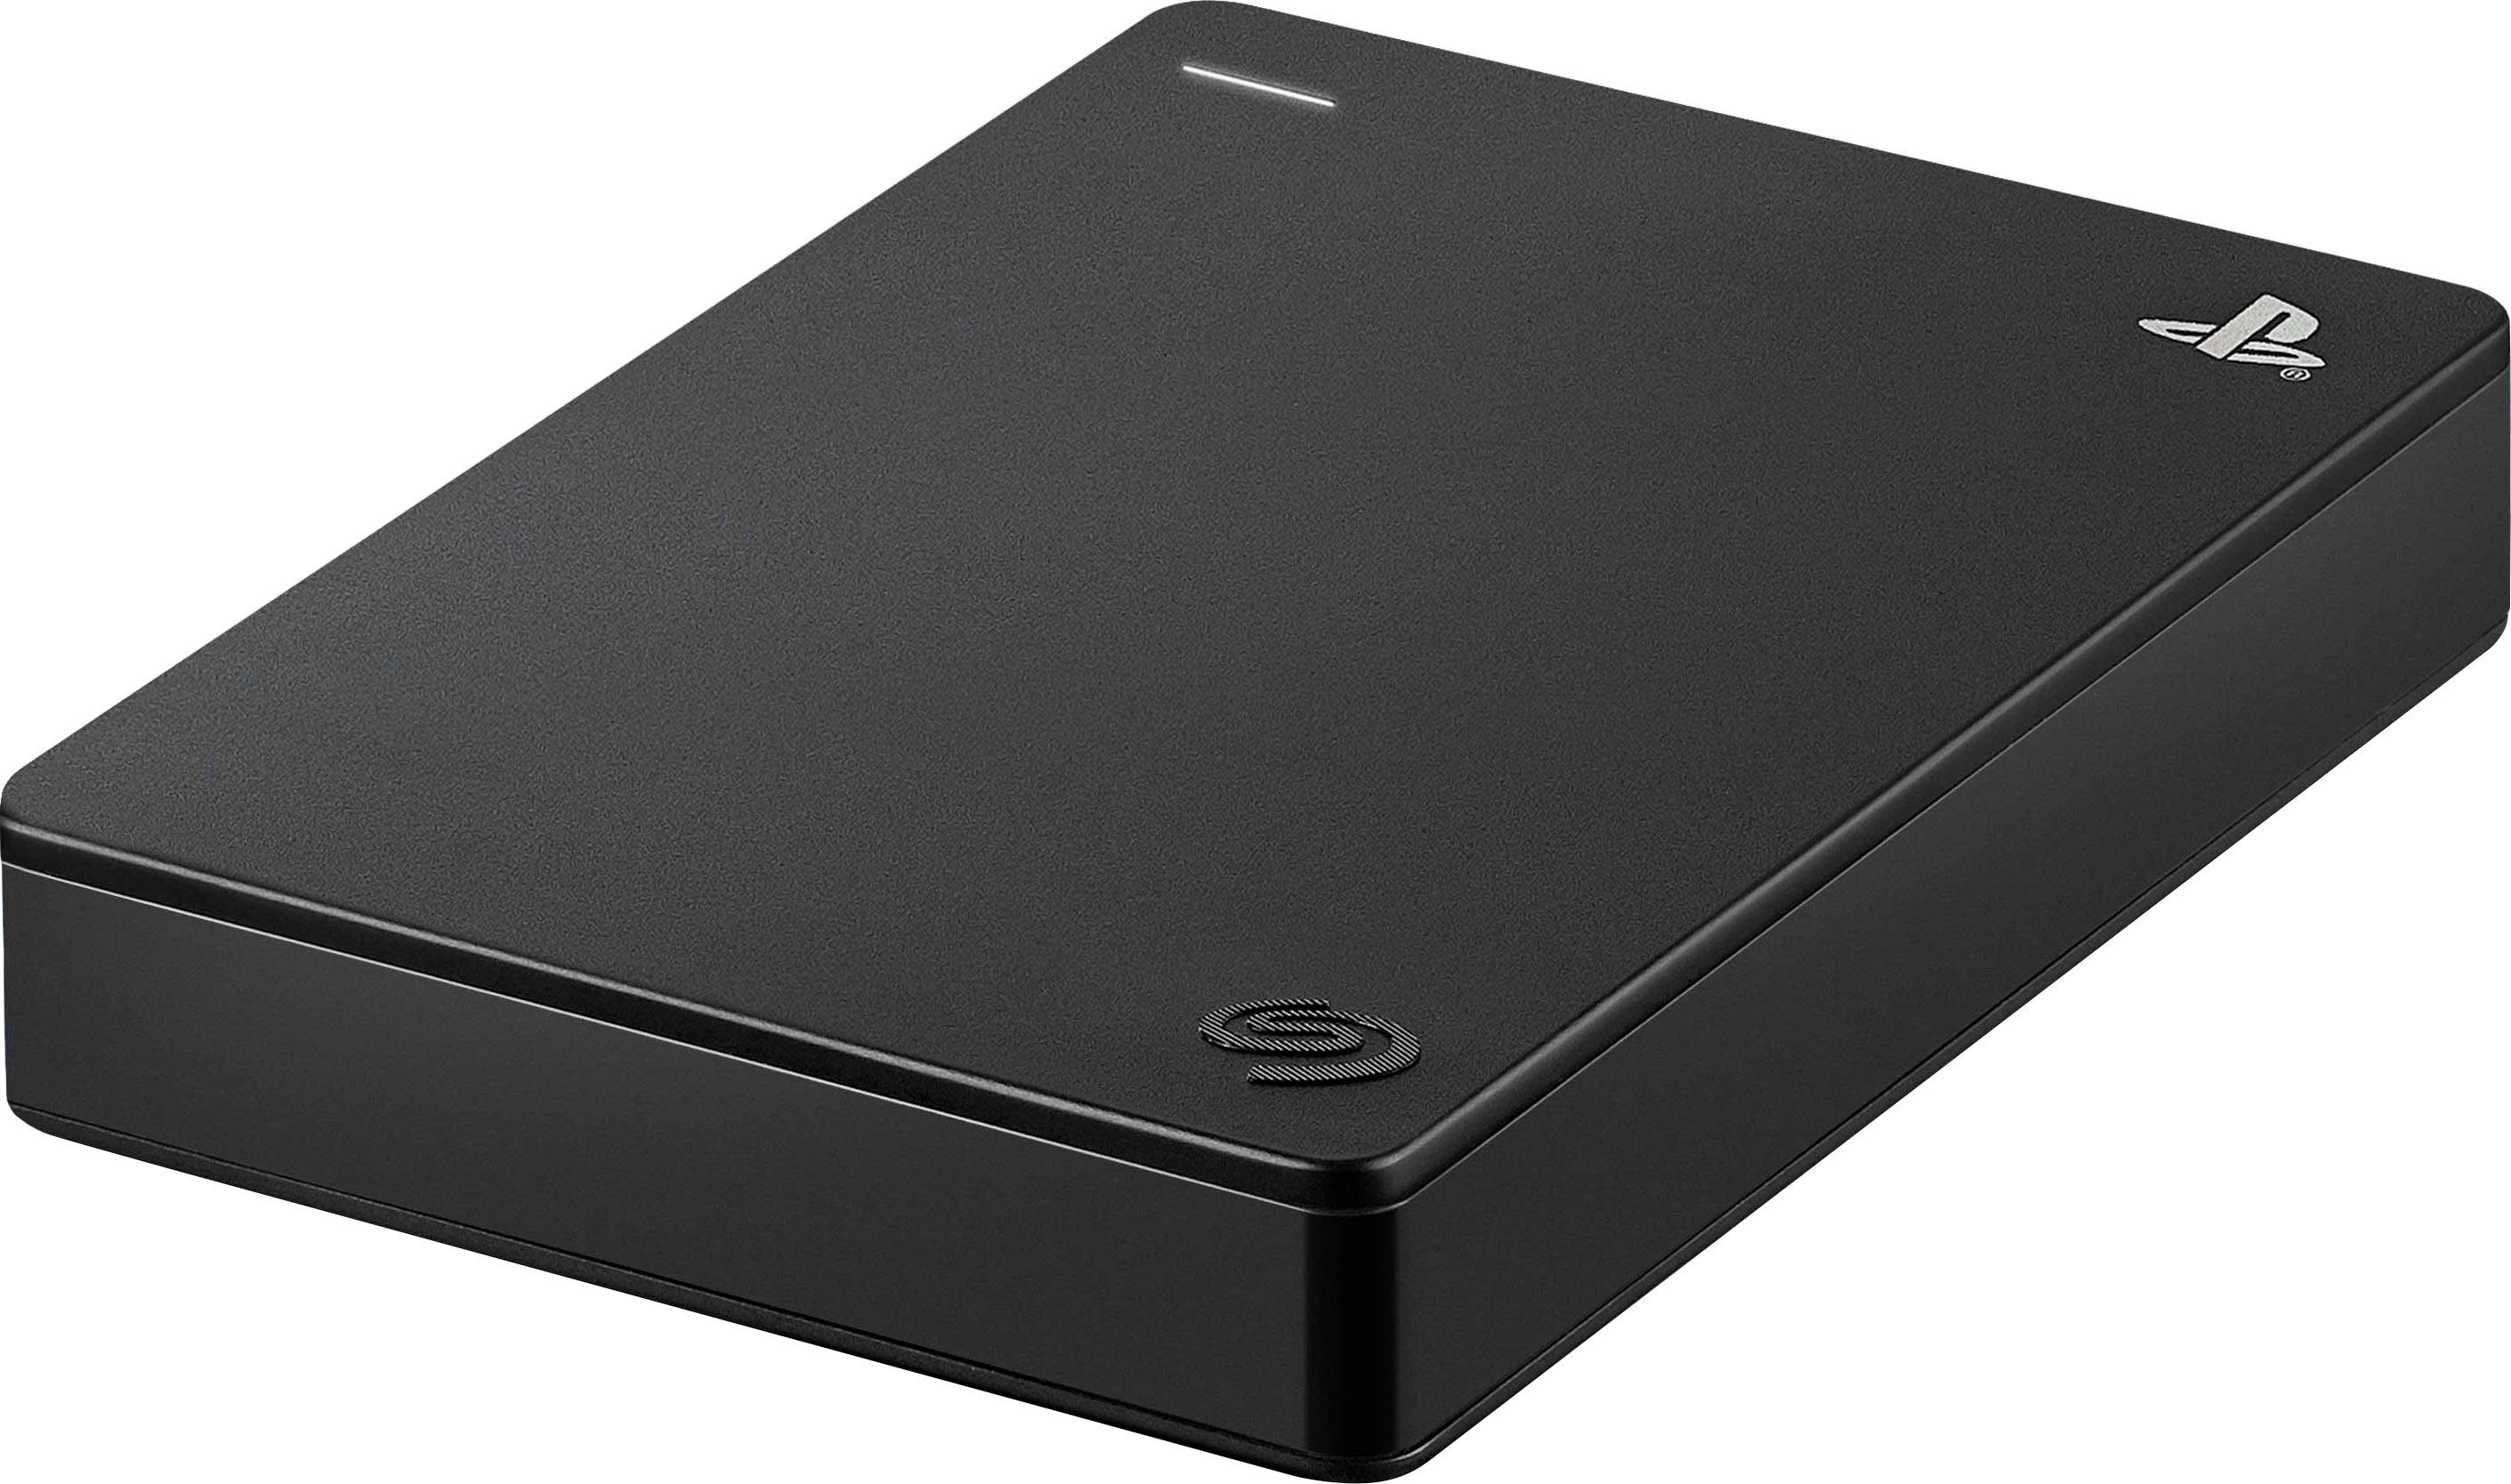 (4 5.0 HDD-Festplatte (USB Drive für Gbps / Game Mbps Lesegeschwindigkeit externe PS4/PS5 MB/S 480 Seagate (USB 2.0) TB) 4TB 3.0)